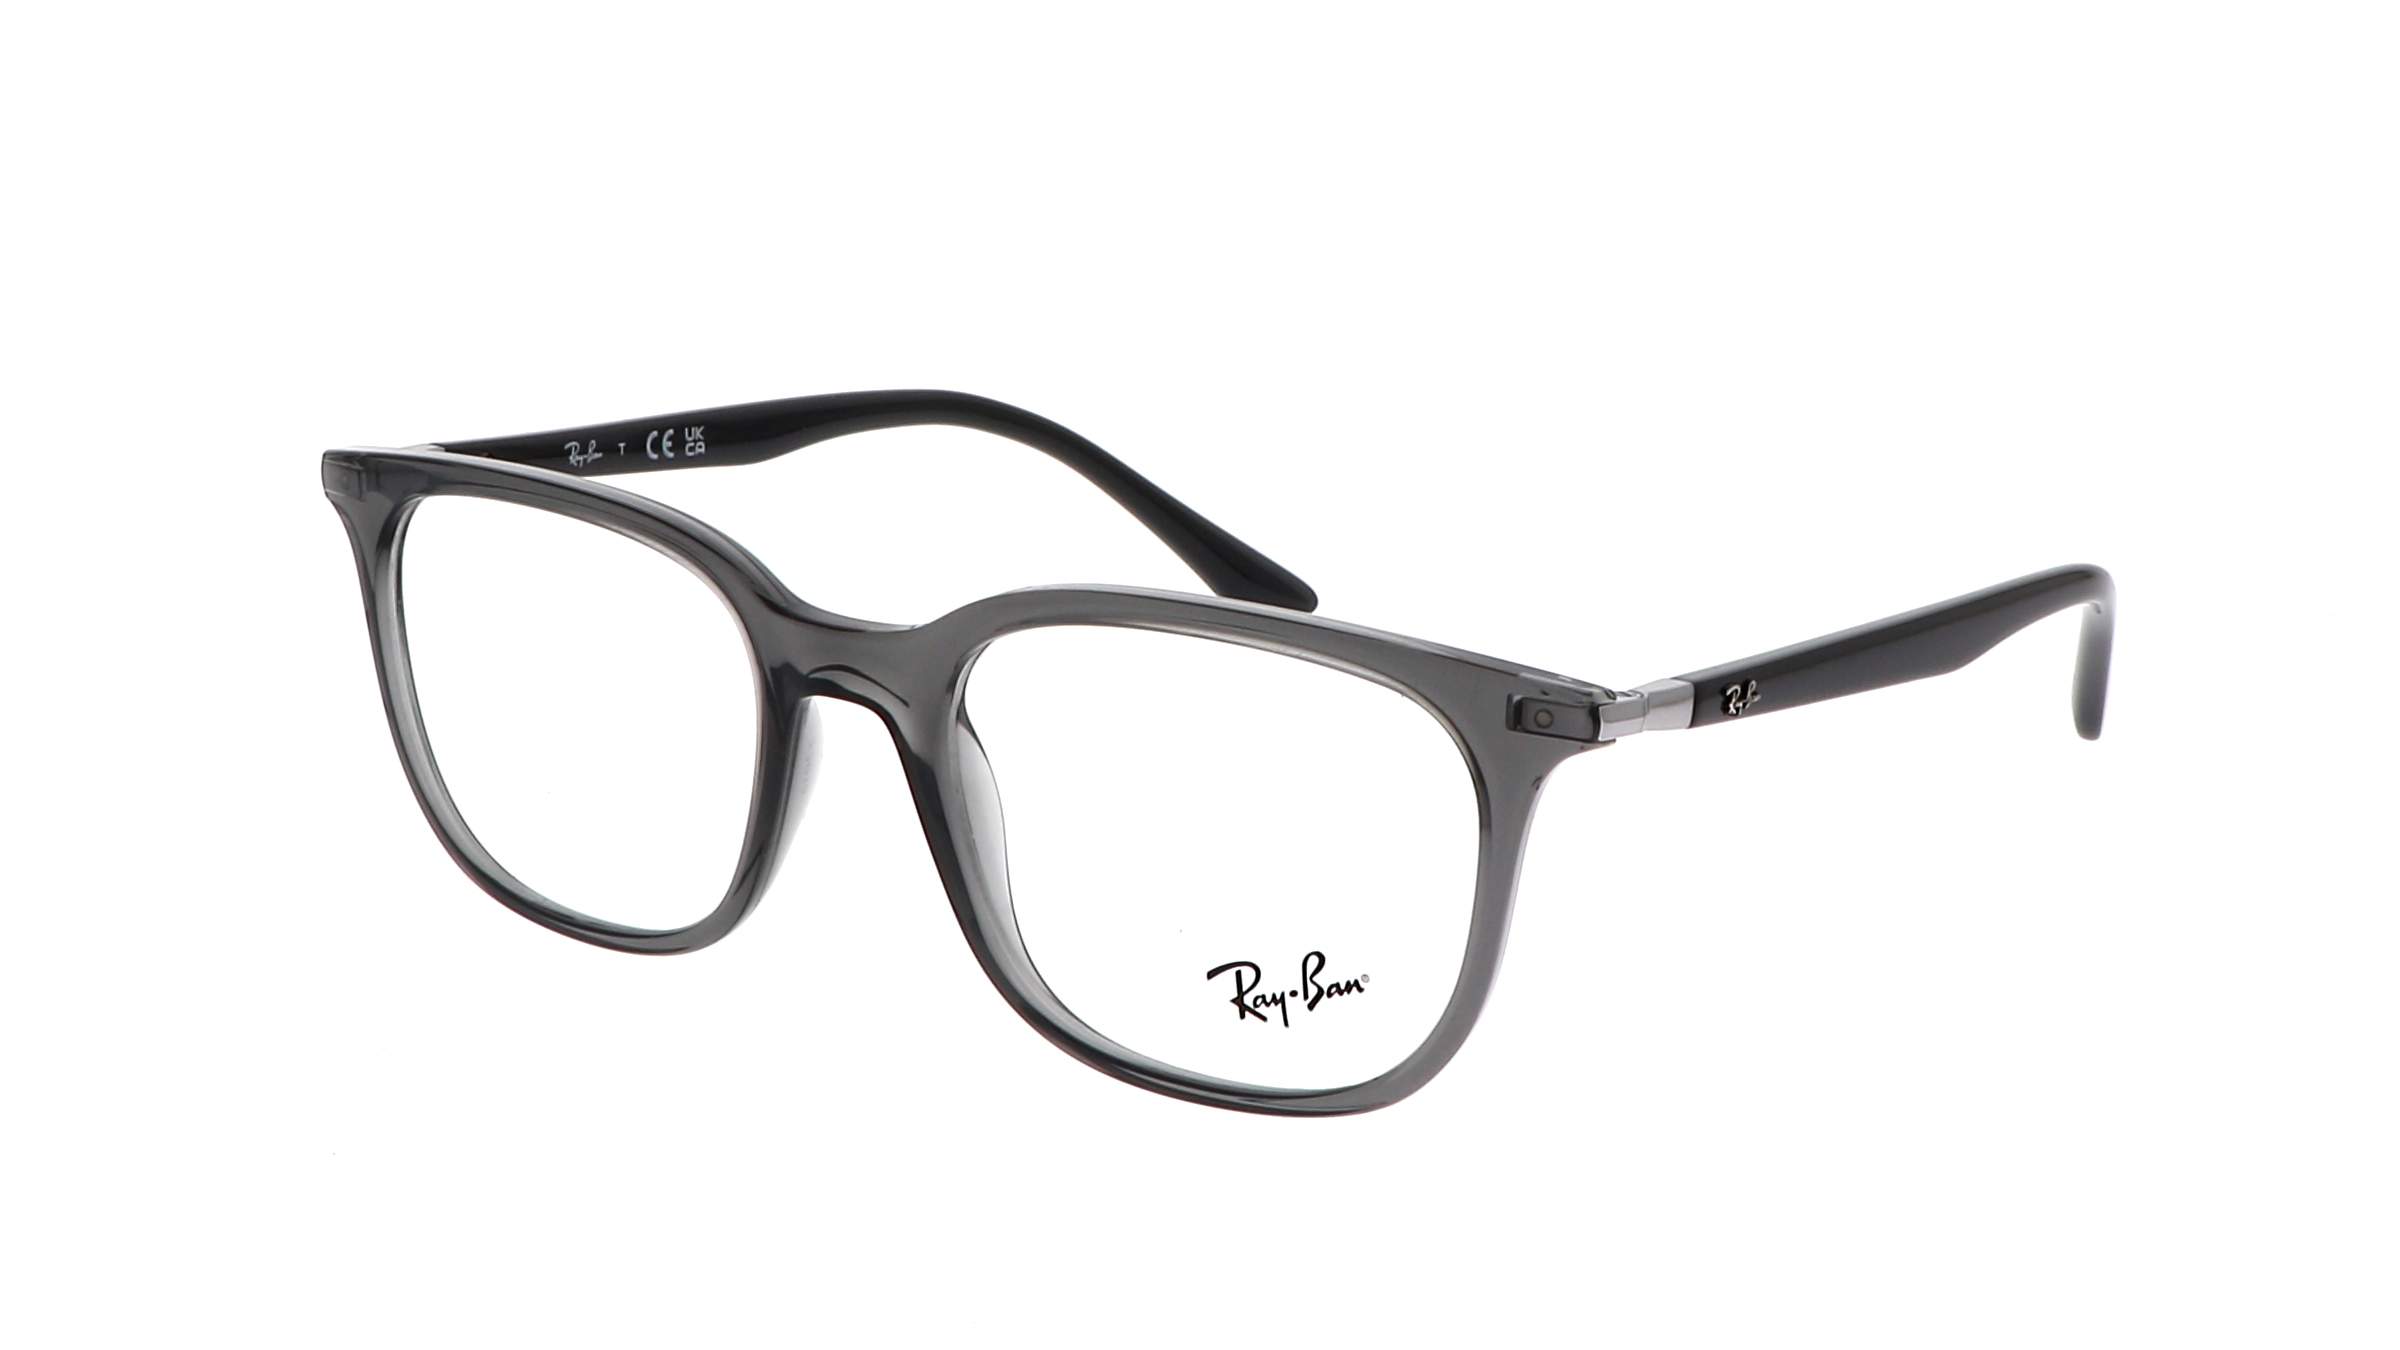 Eyeglasses Ray-Ban RX7211 8205 52-19 Transparent grey in stock | Price ...